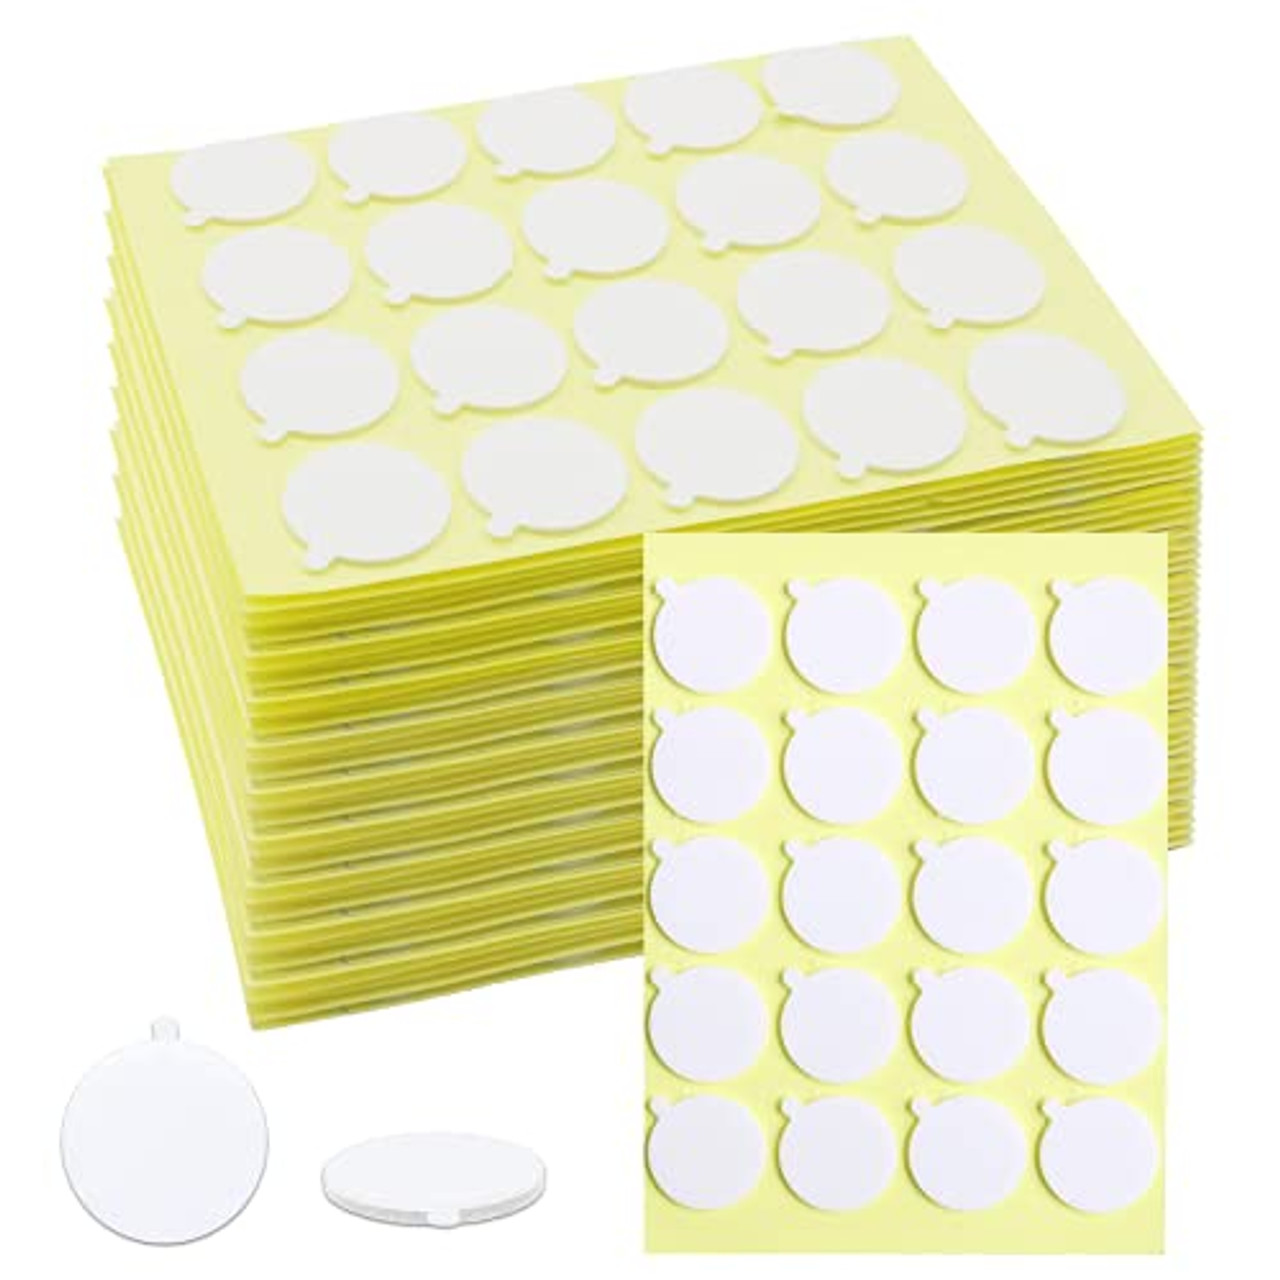 240PCS Candle Wick Stickers, Heat Resistance Double-Sided Stickers